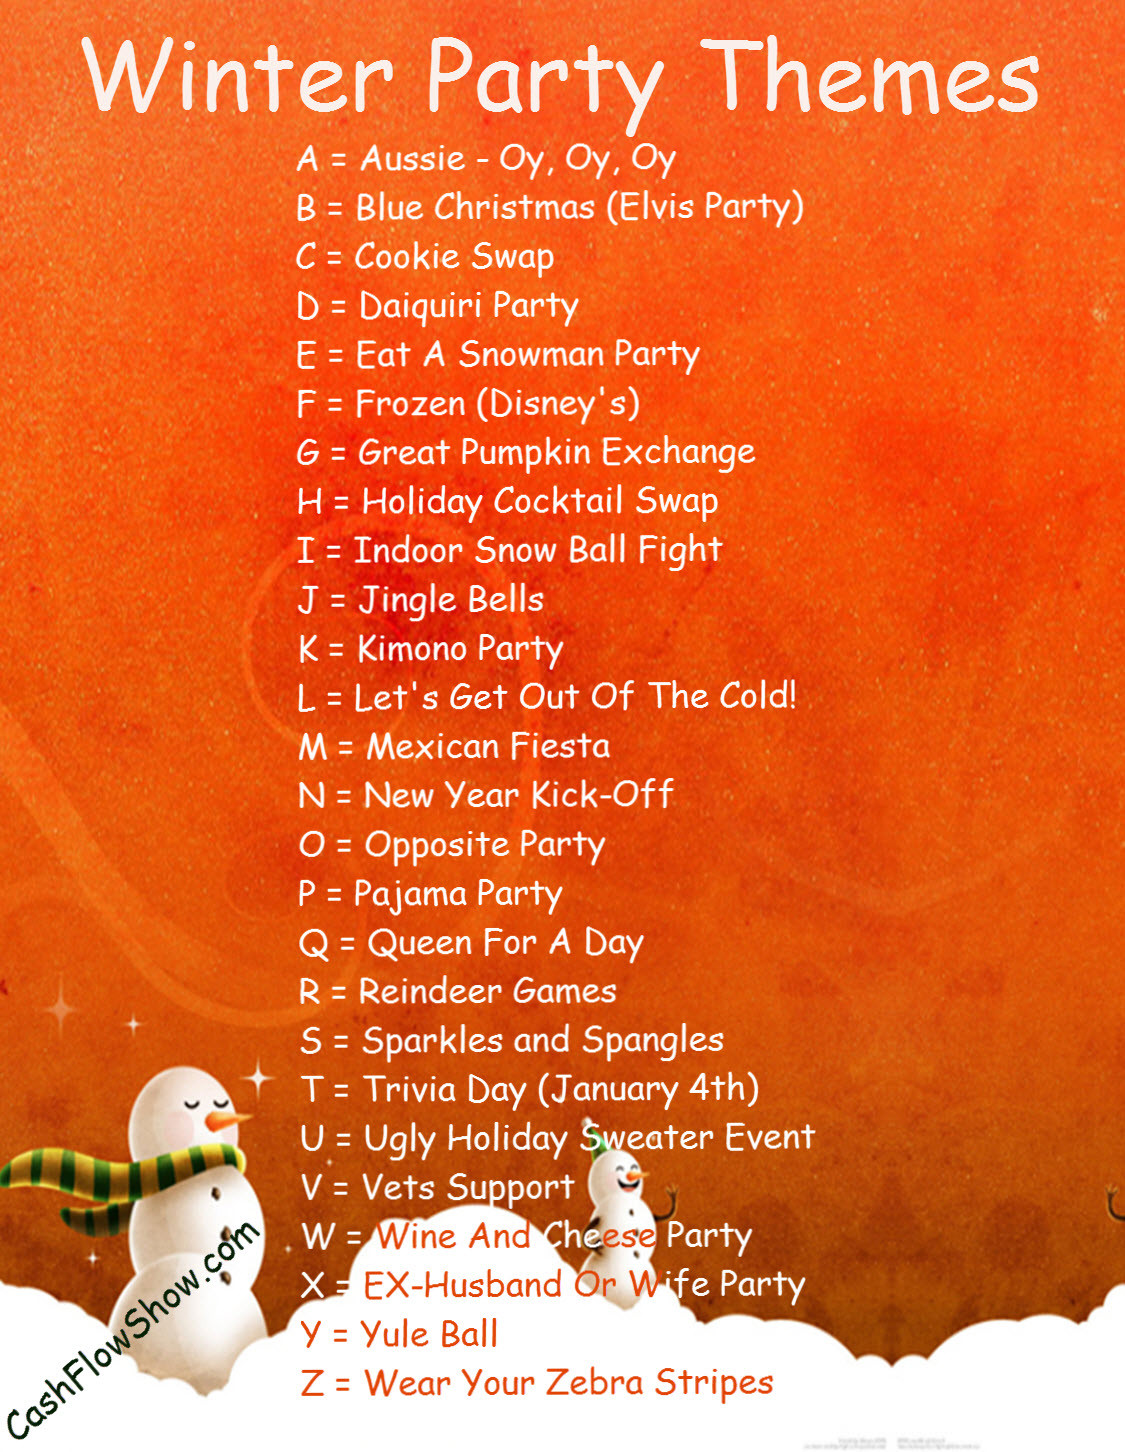 Cool Holiday Party Ideas
 Read A Z List To Find A Winter Party Theme For Your Event